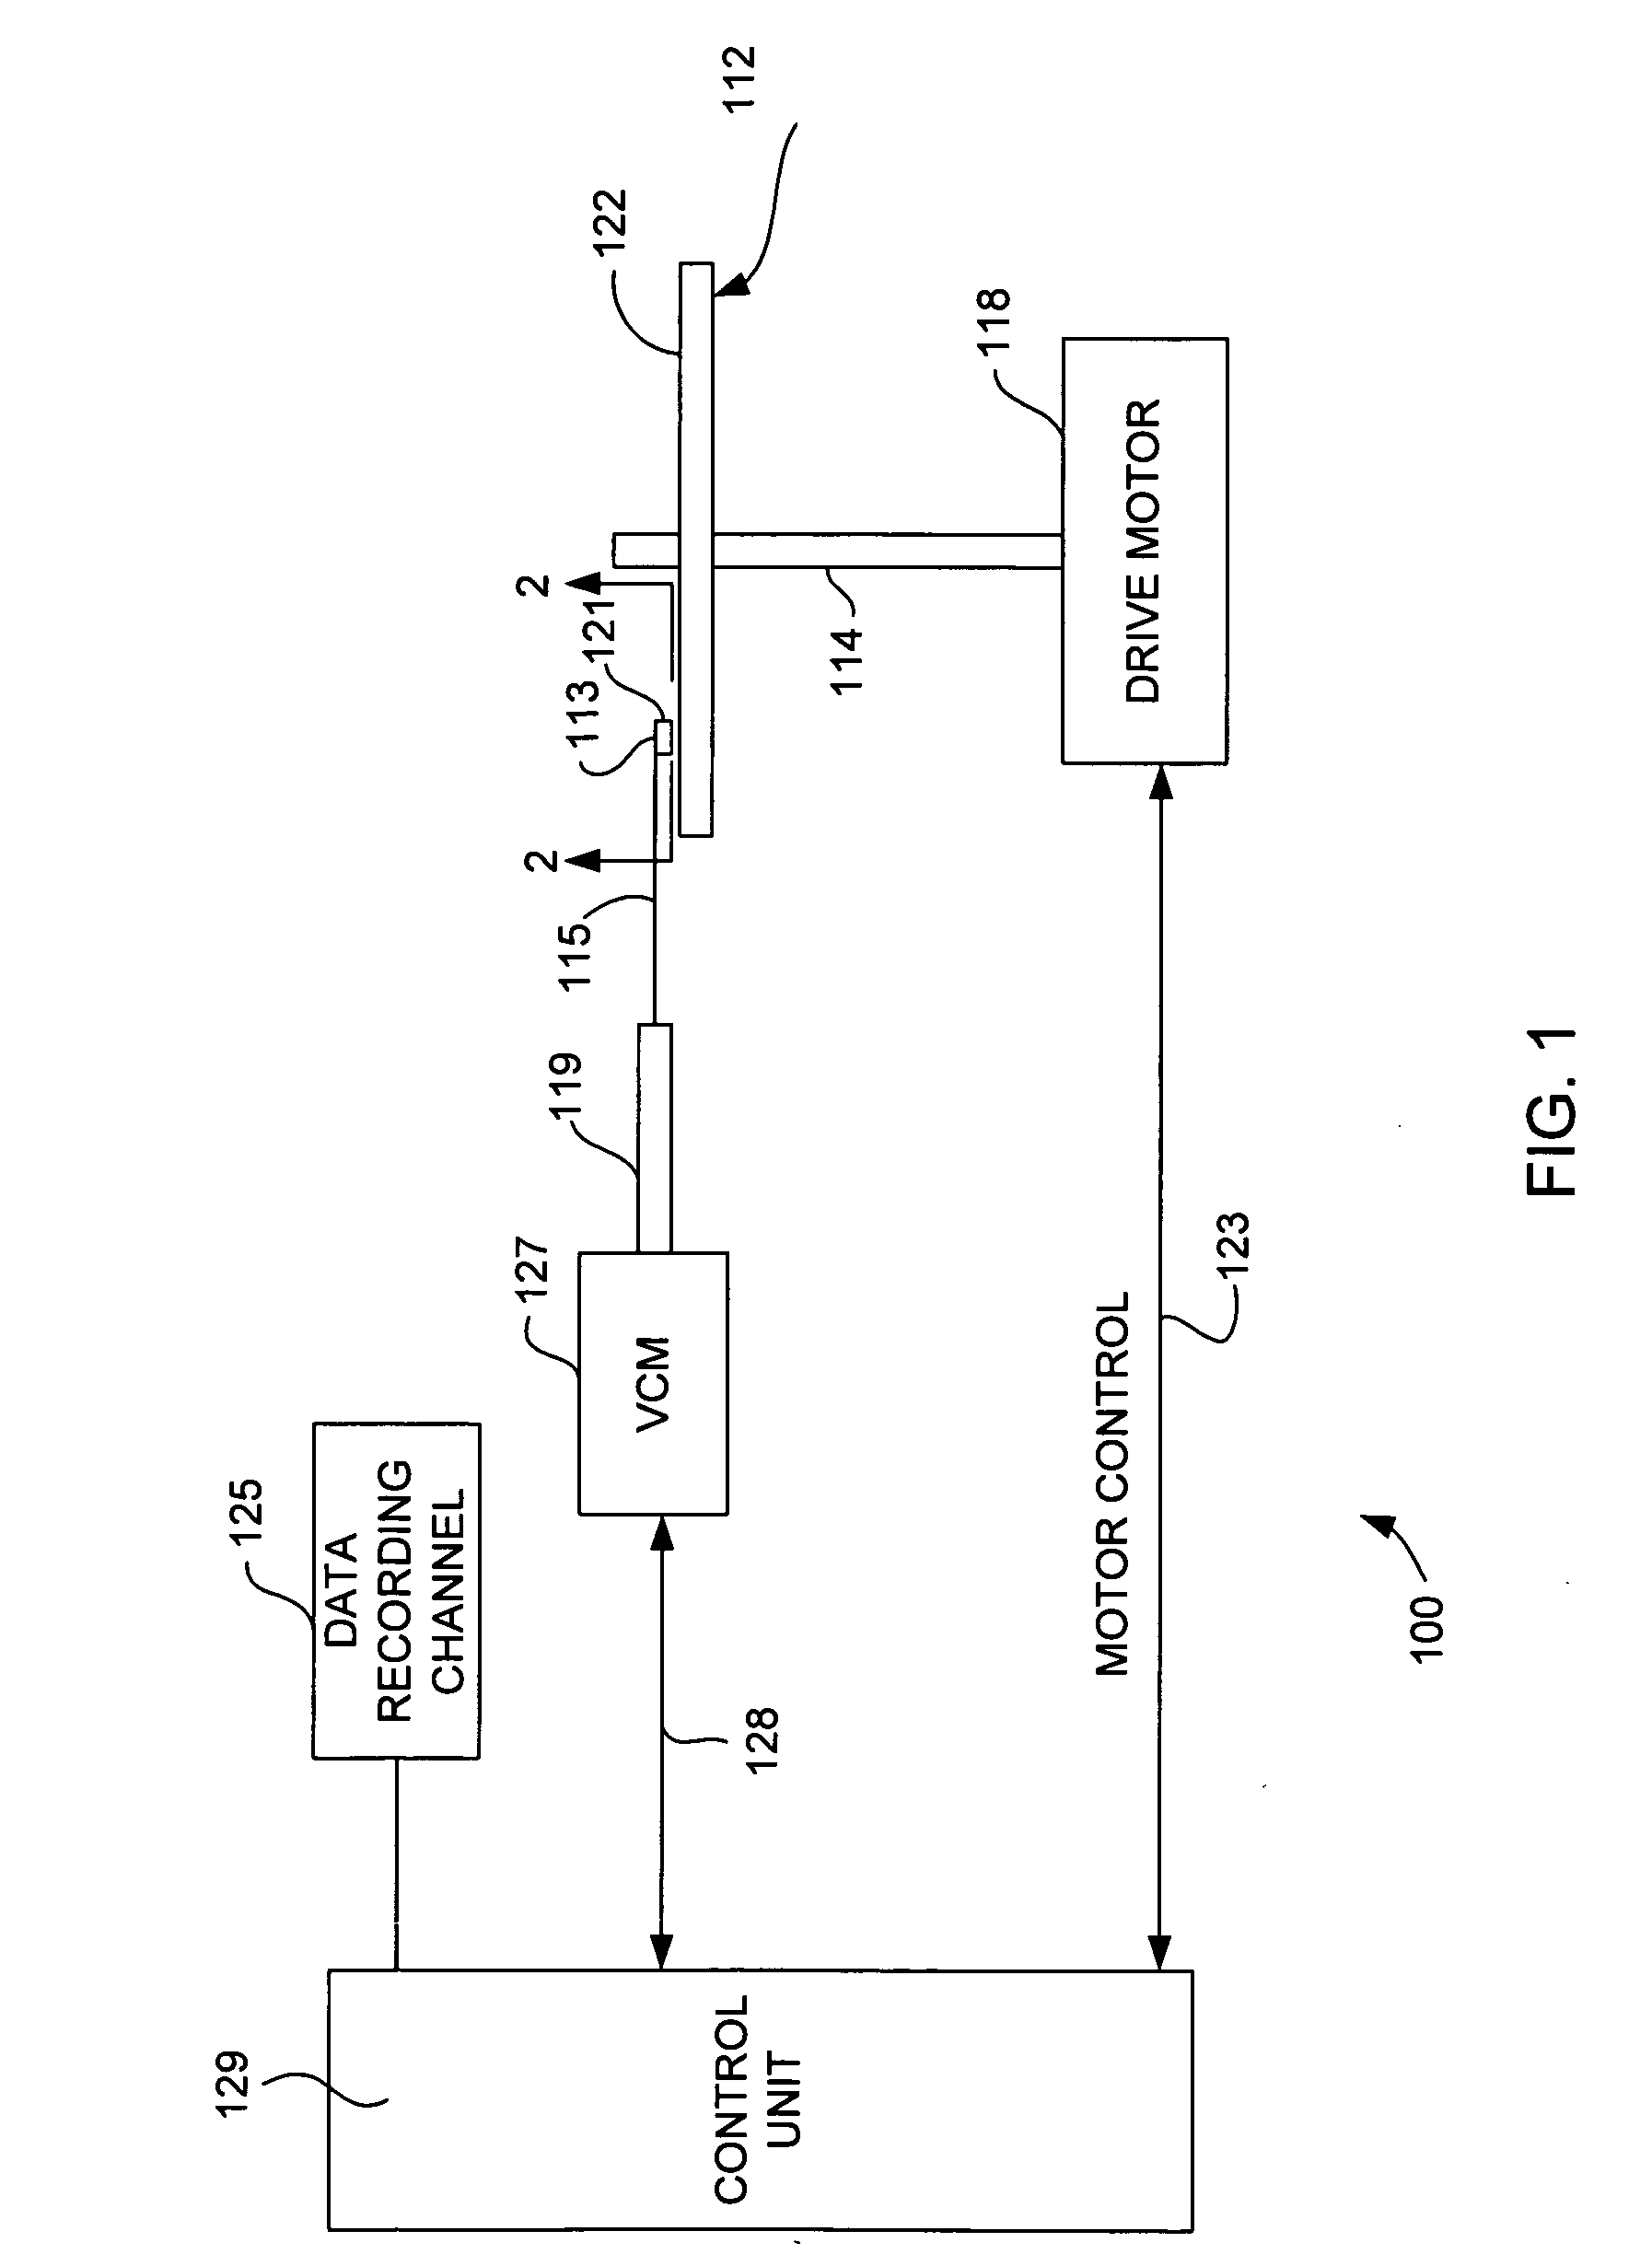 Magnetic write head employing multiple magnetomotive force (MMF) sources